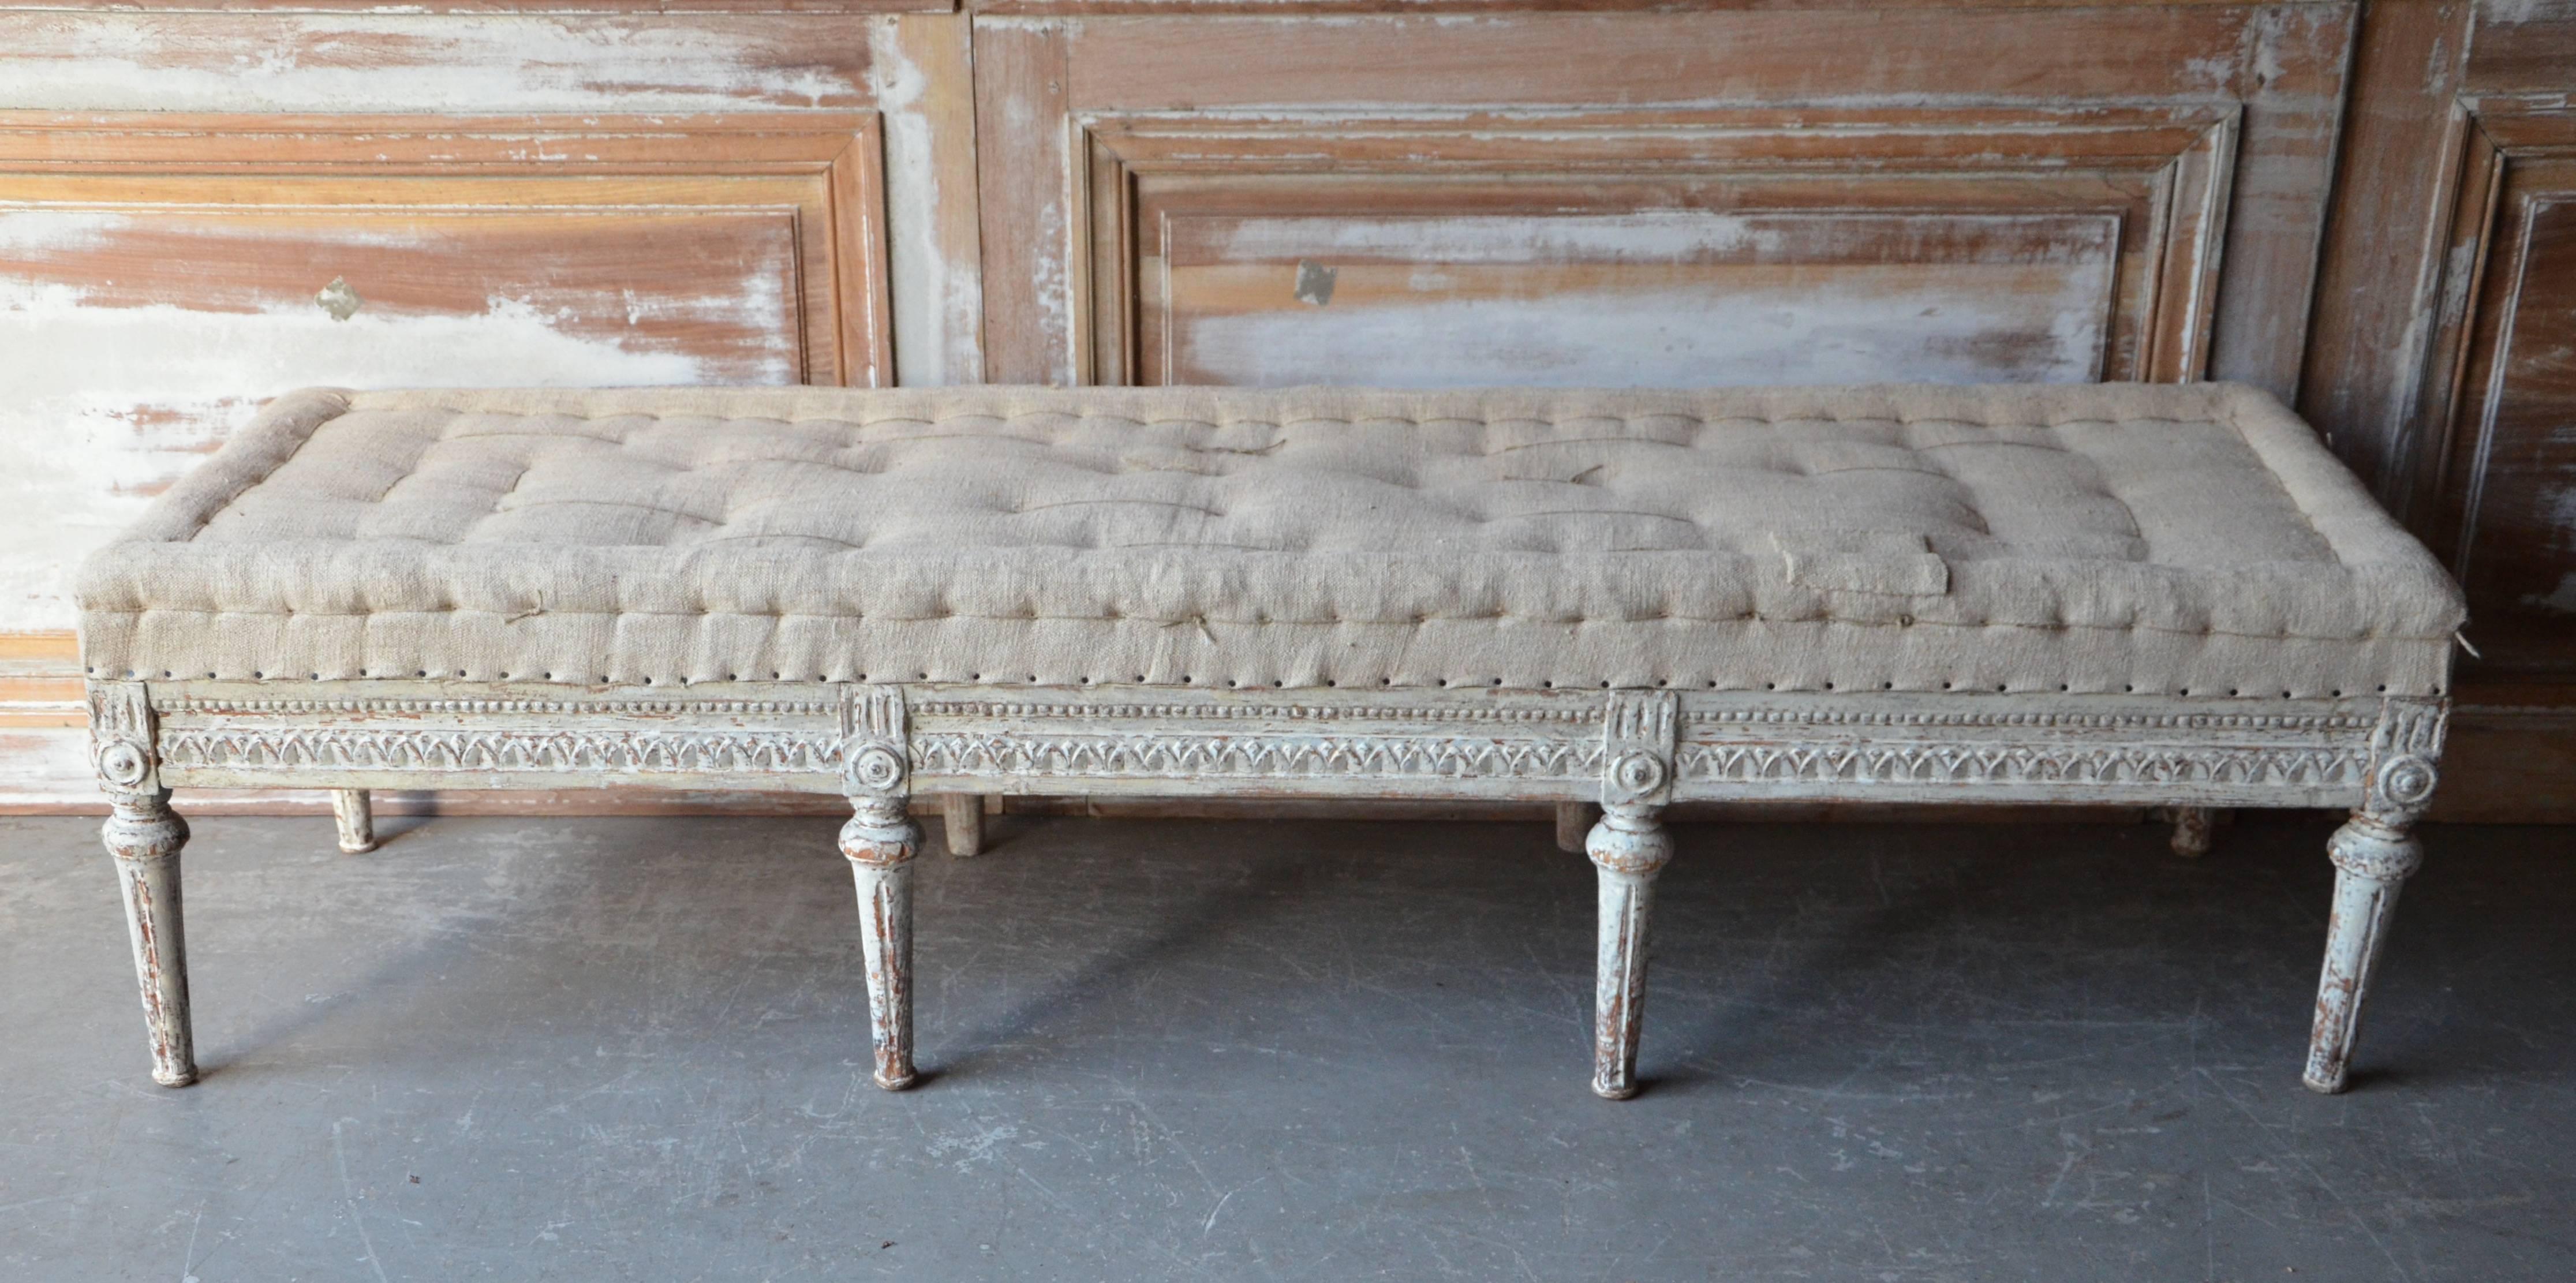 Swedish period Gustavian bench, circa 1800, finished on three sides with leaf rod and rosette carvings on carved round fluted legs. Scraped to original cream white finish and upholstered in traditional way in antique hand-stitched linen. Timeless